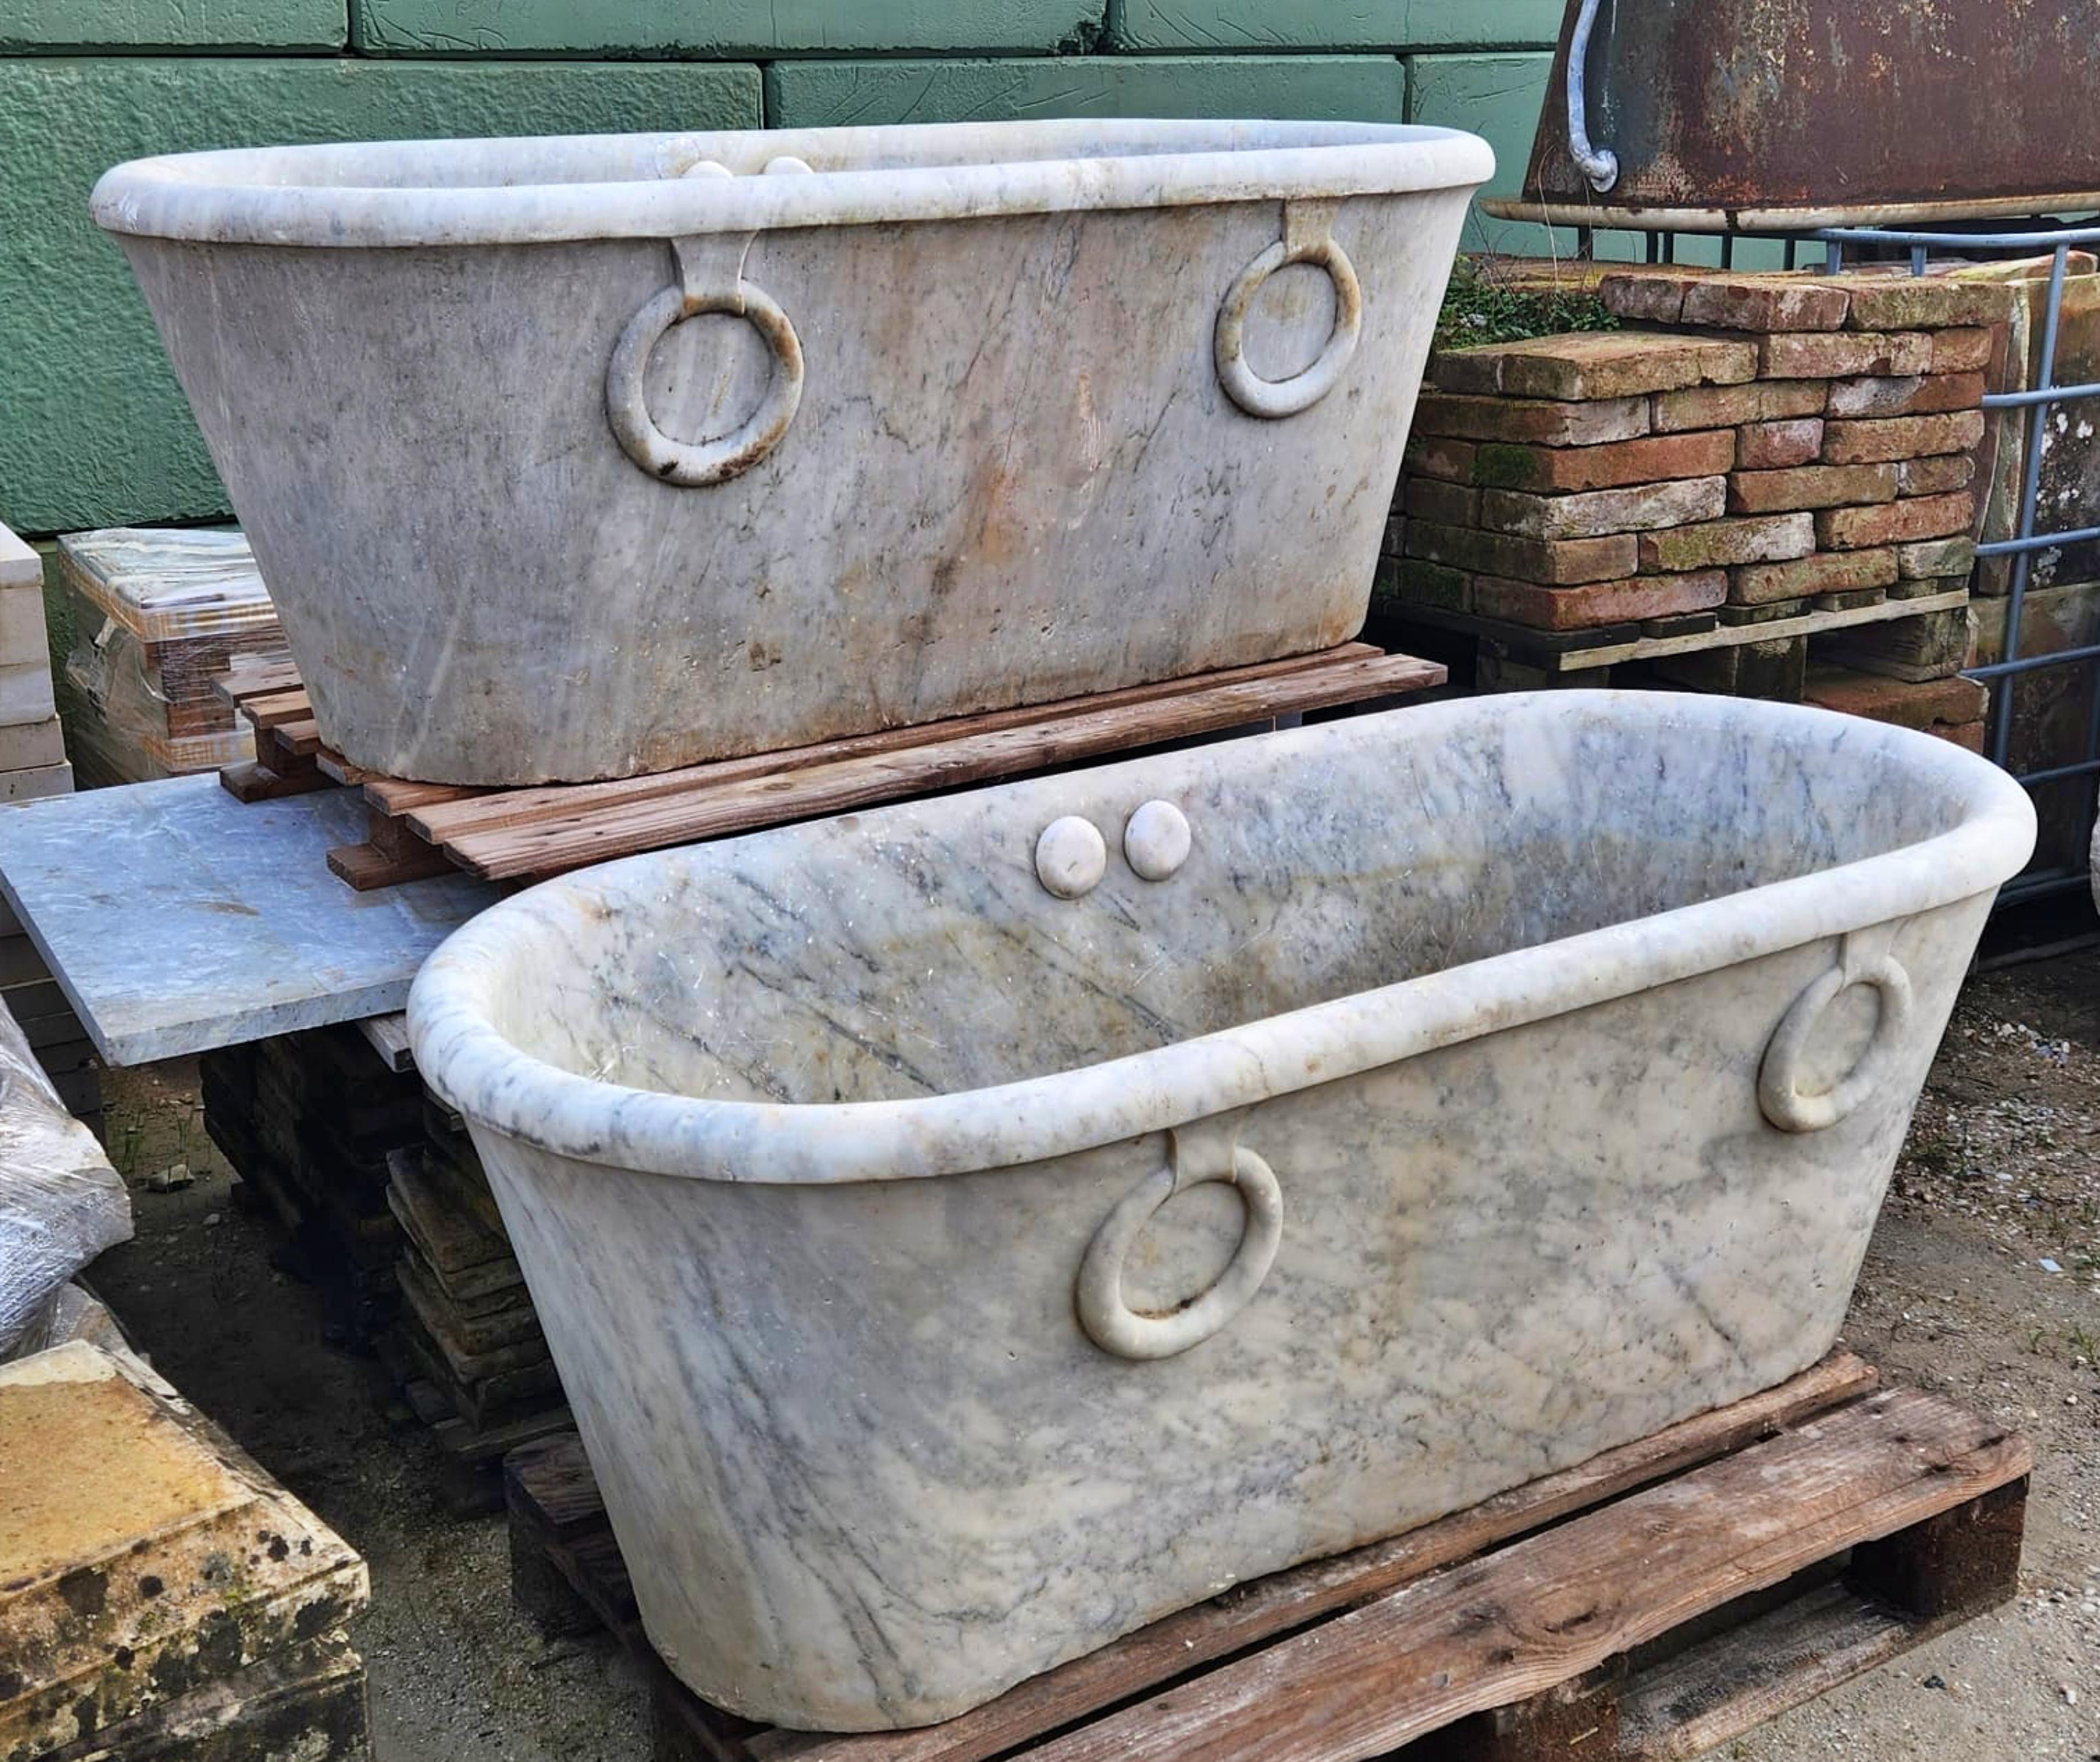 AMAZING PAIR OF ANCIENT WHITE CARRARA MARBLE TUBS WITH RINGS late 19th Century

Ancient 